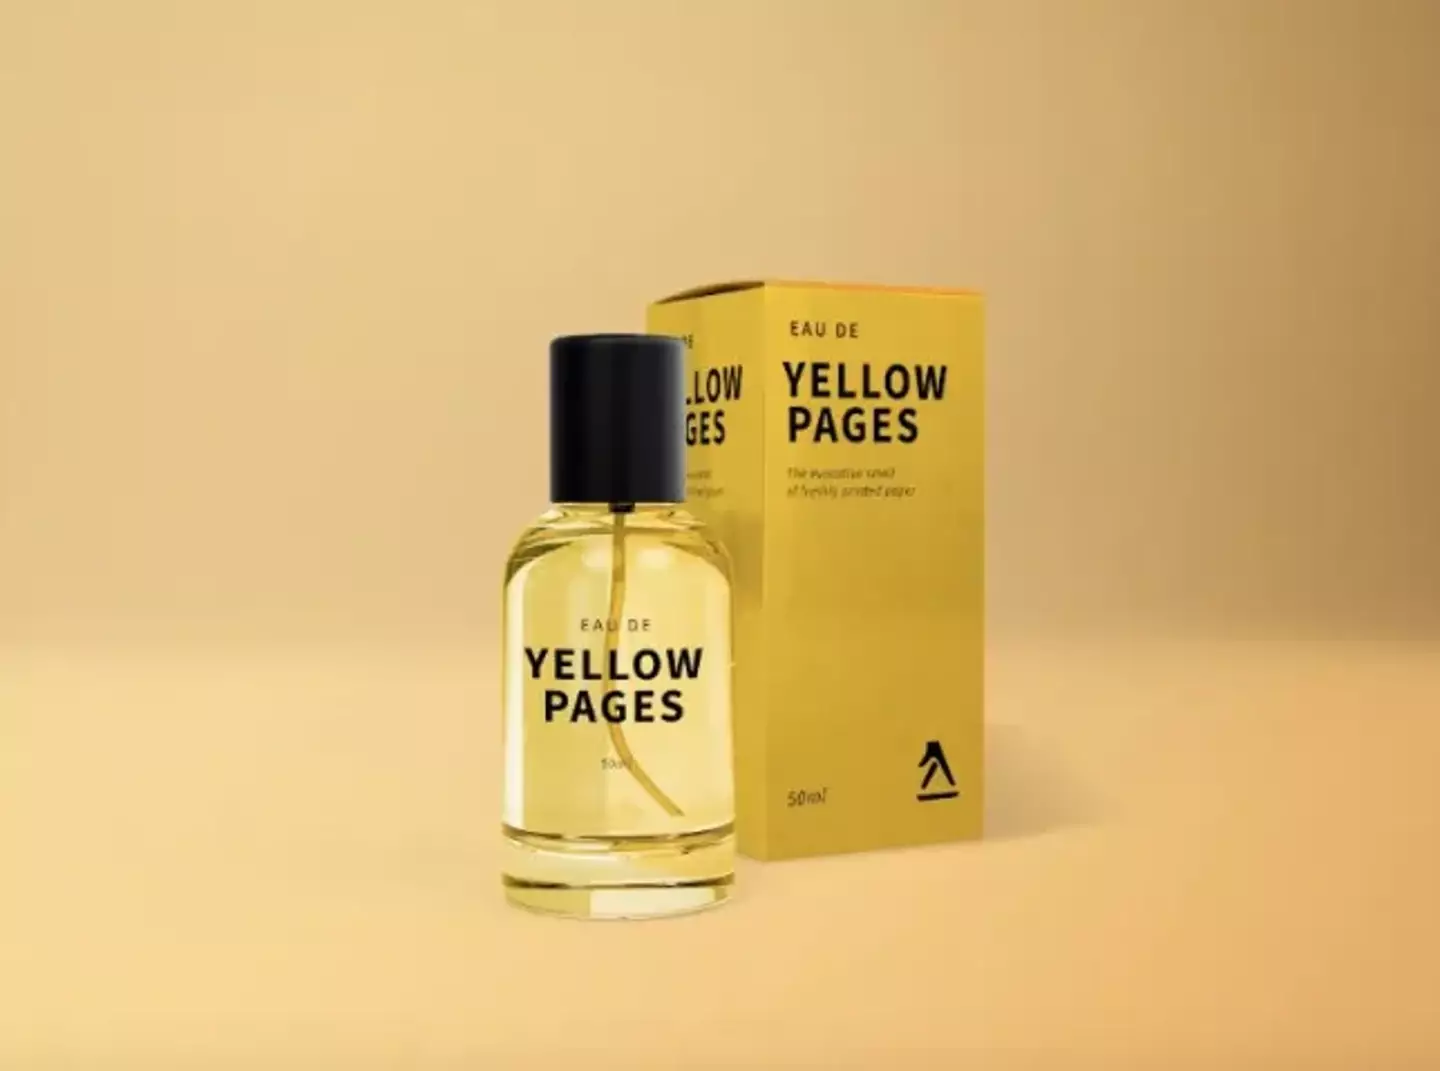 The Yellow Pages perfume has been released by Yell.